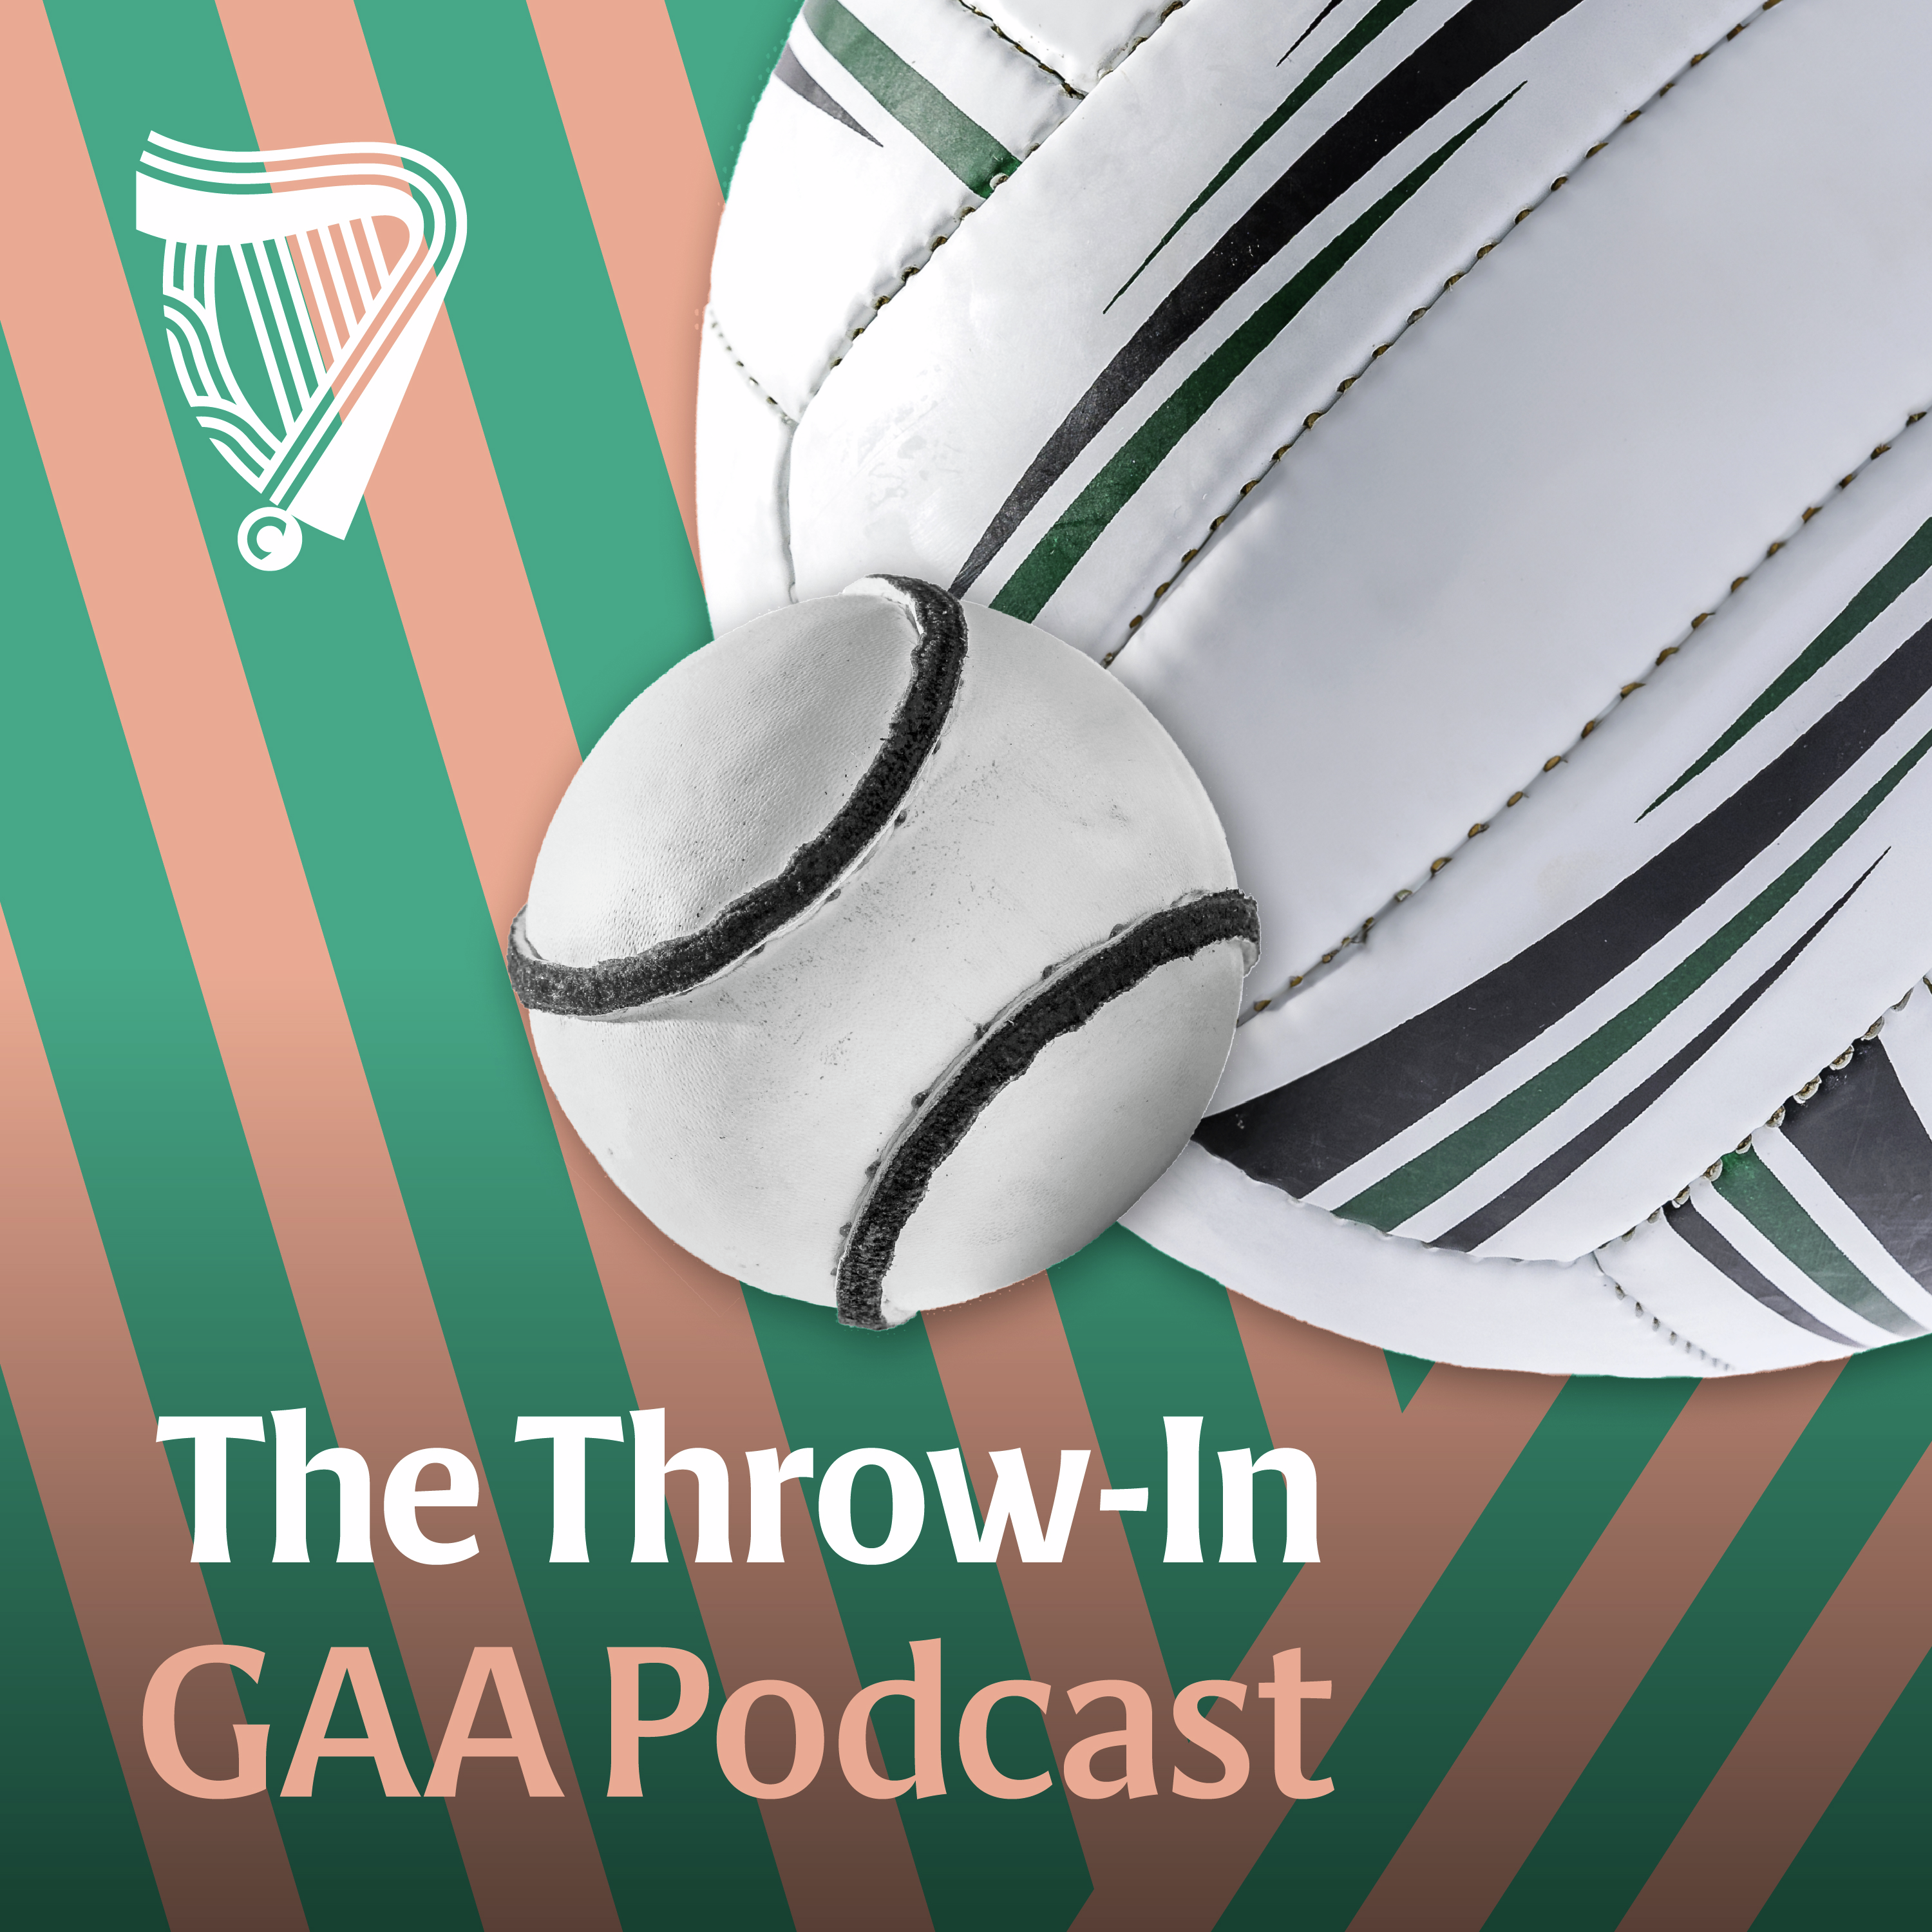 The Throw-In Football: Kerry’s stasis, Canavan’s starring influence and how can Gaelic football really be improved?